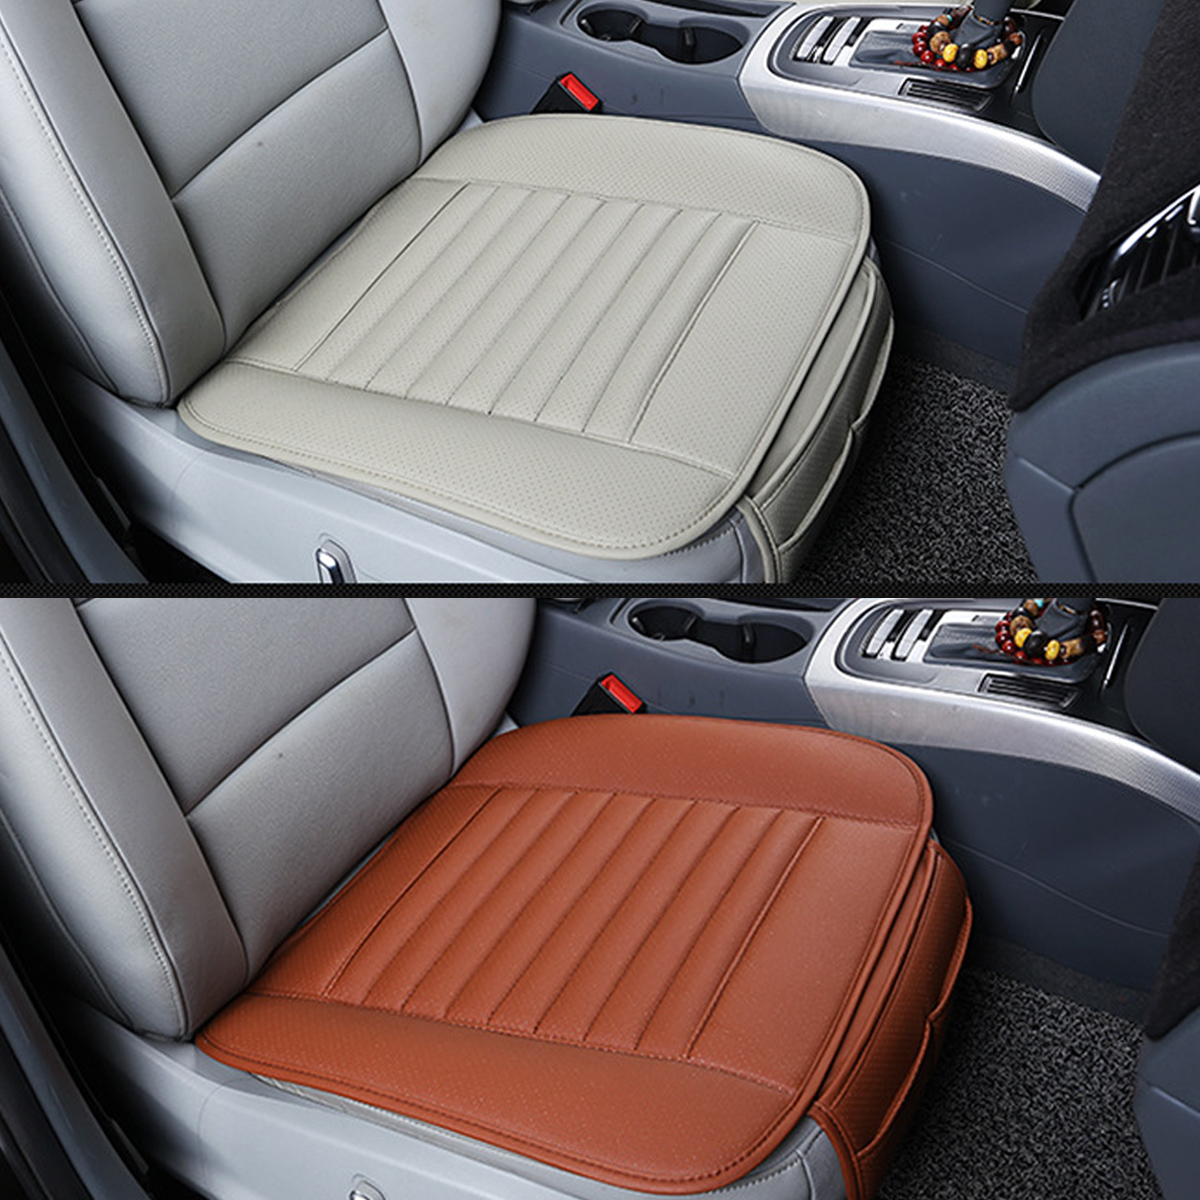 Car Front Seat Cover Cushion Breathable PU Leather Bamboo Charcoal Pad Mat